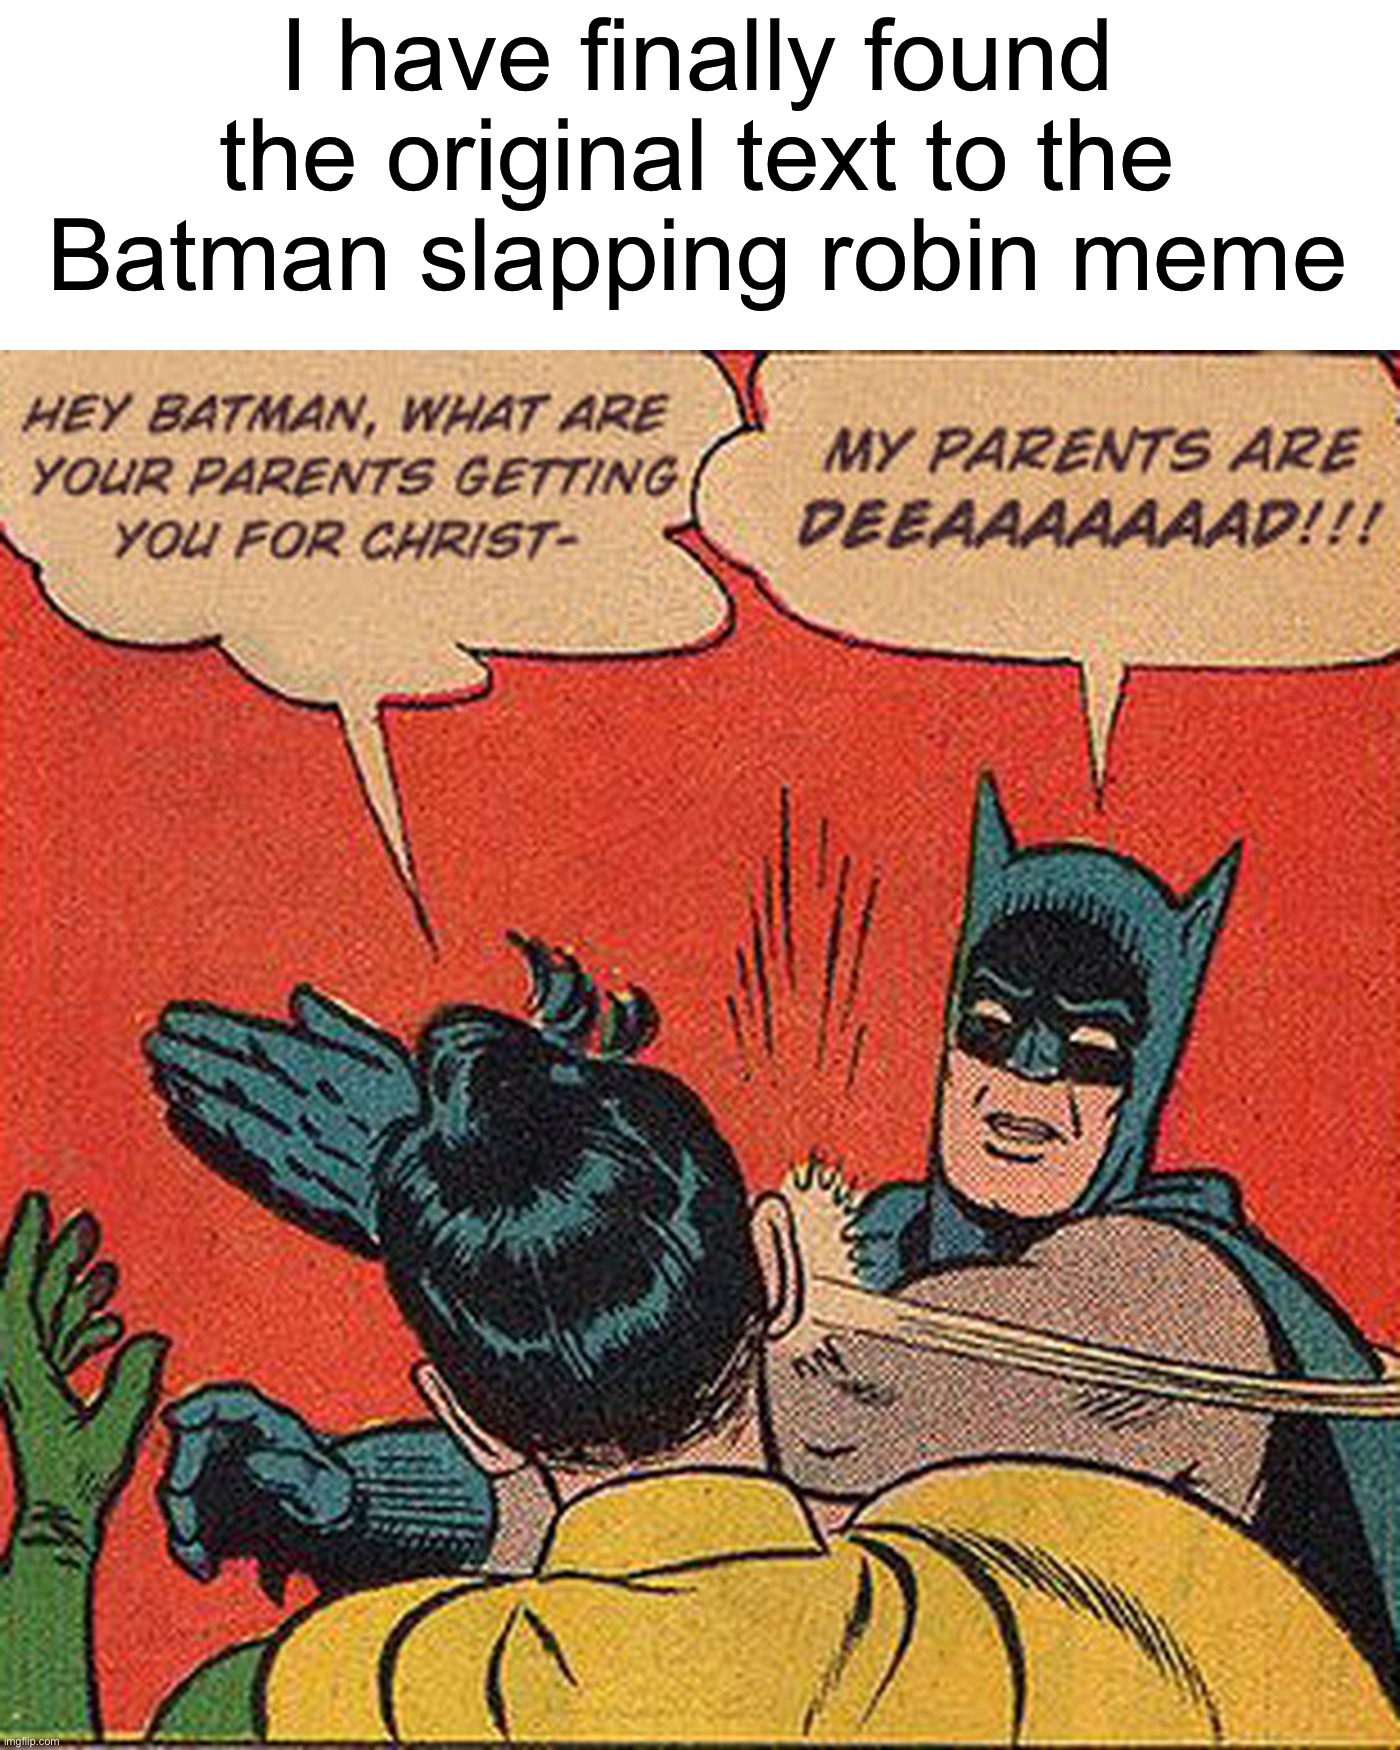 Wait a minute, that’s illegal | I have finally found the original text to the Batman slapping robin meme | image tagged in memes,funny,batman slapping robin,original meme,original,woah | made w/ Imgflip meme maker